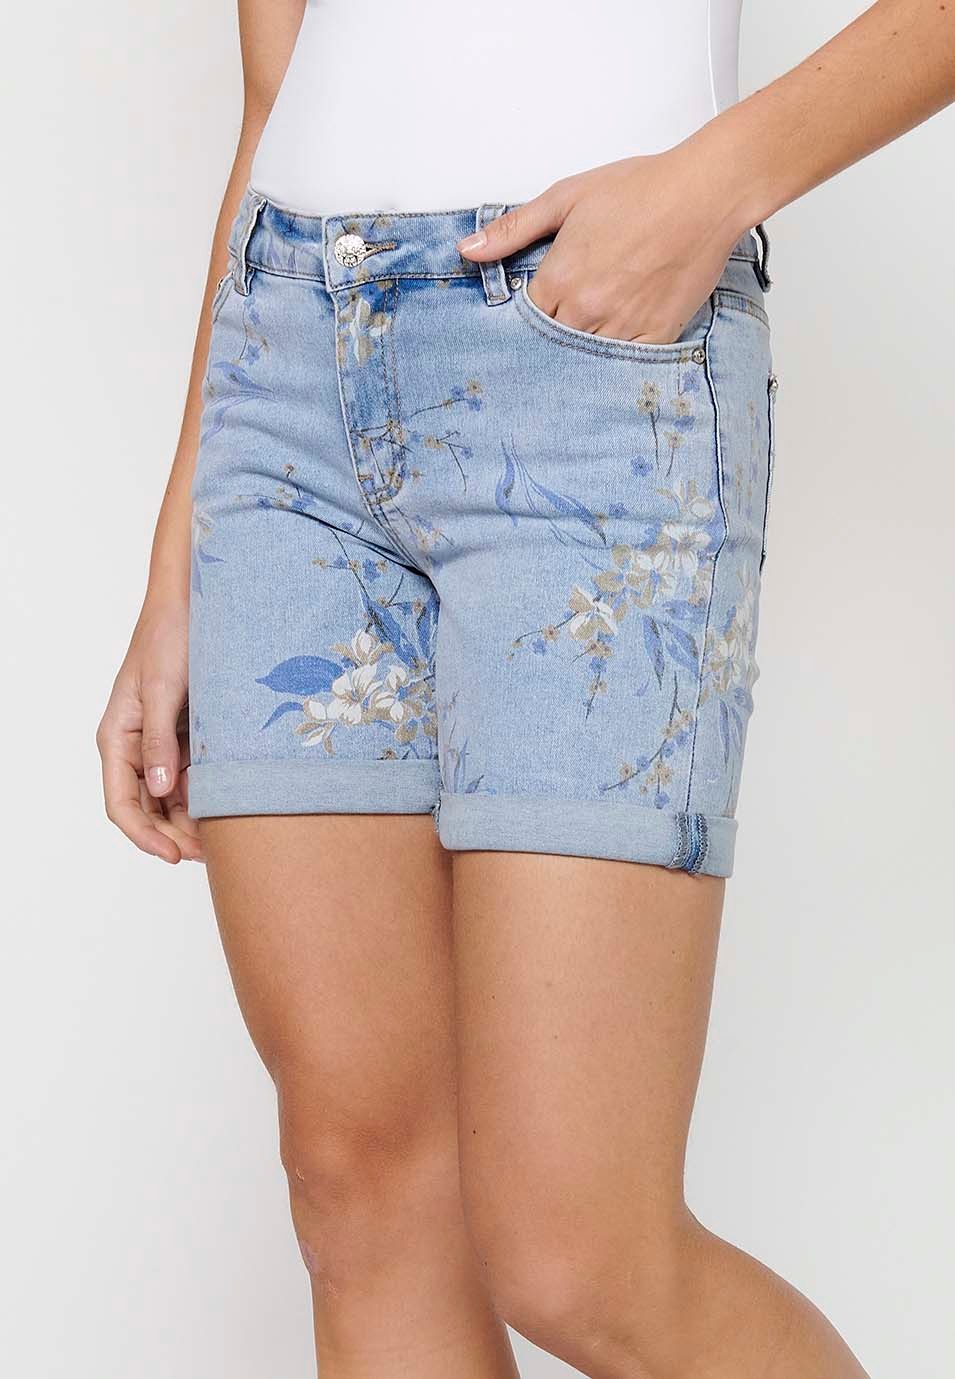 Shorts with a turn-up finish with zipper and button closure with a Blue floral print for Women 1